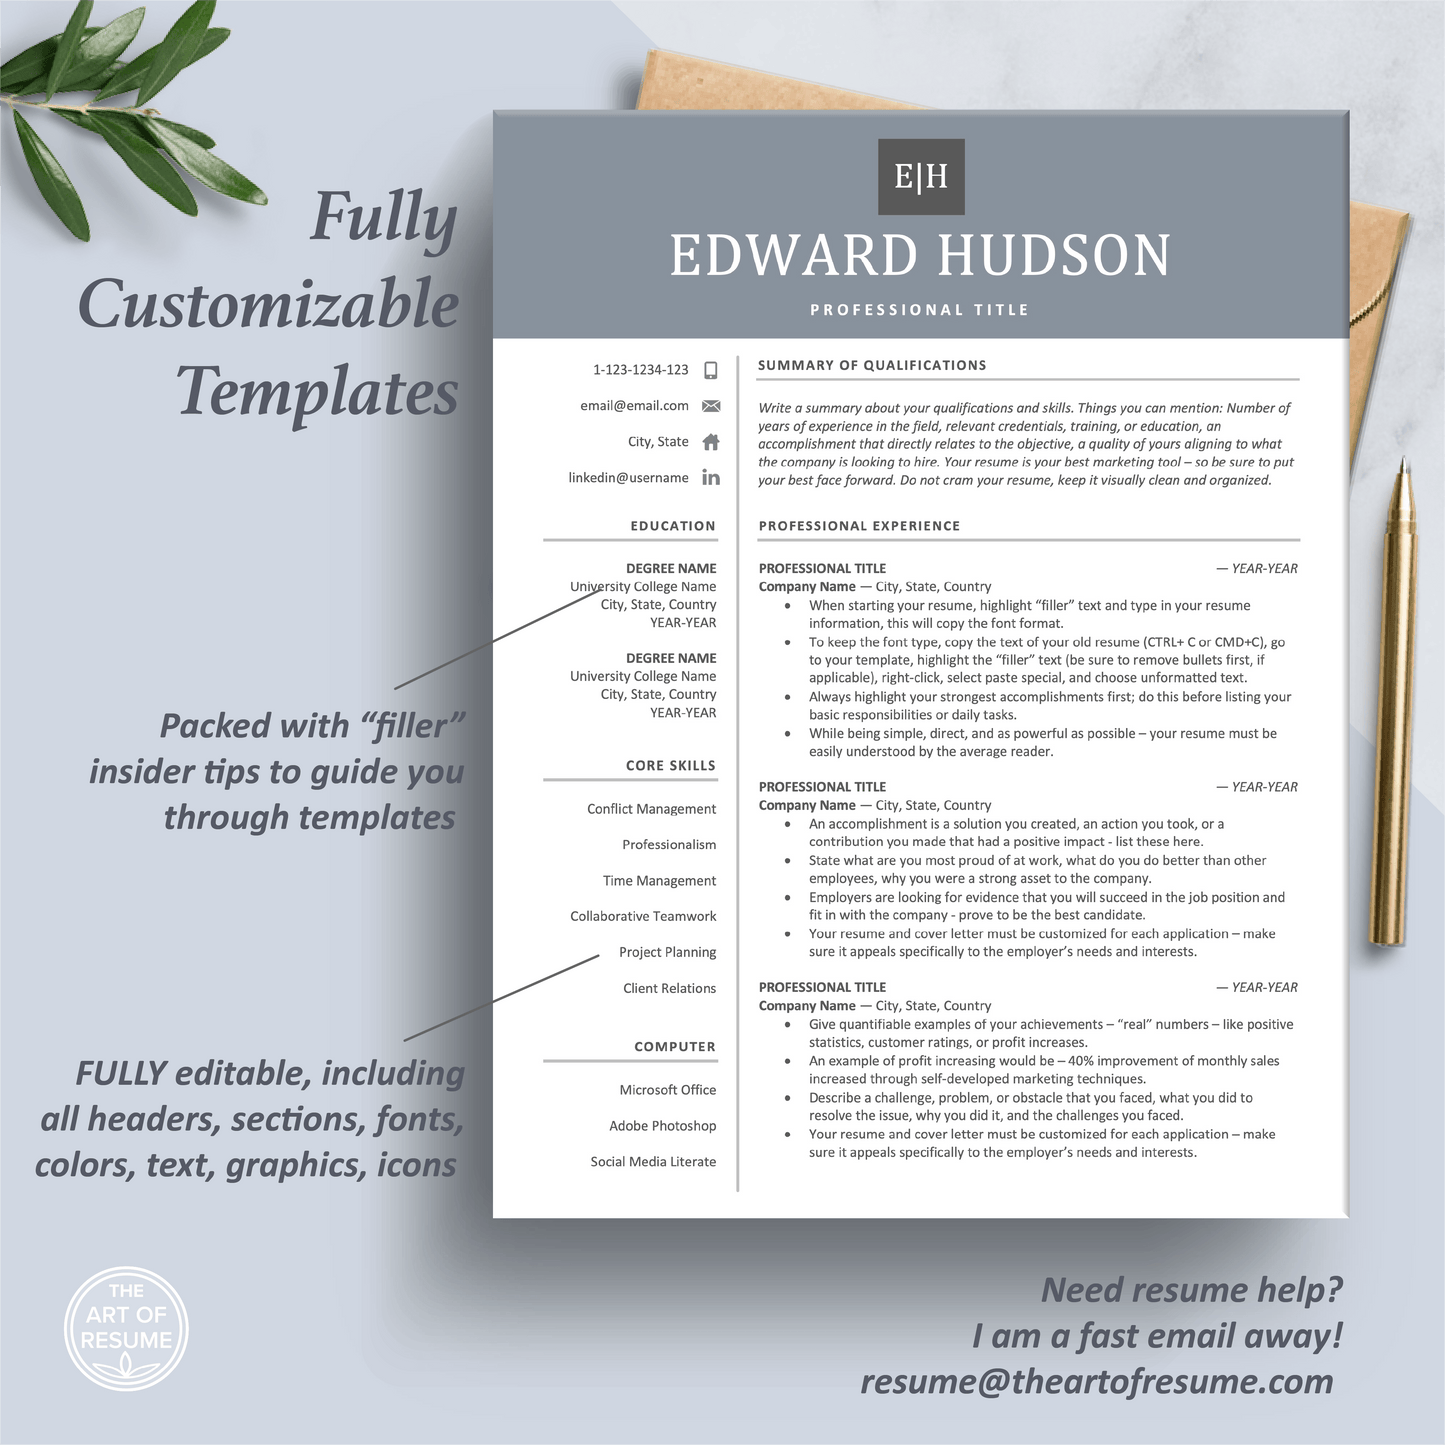 The Art of Resume Templates | One Page Professional Simple Blue Grey Resume CV Design Template Maker | Curriculum Vitae